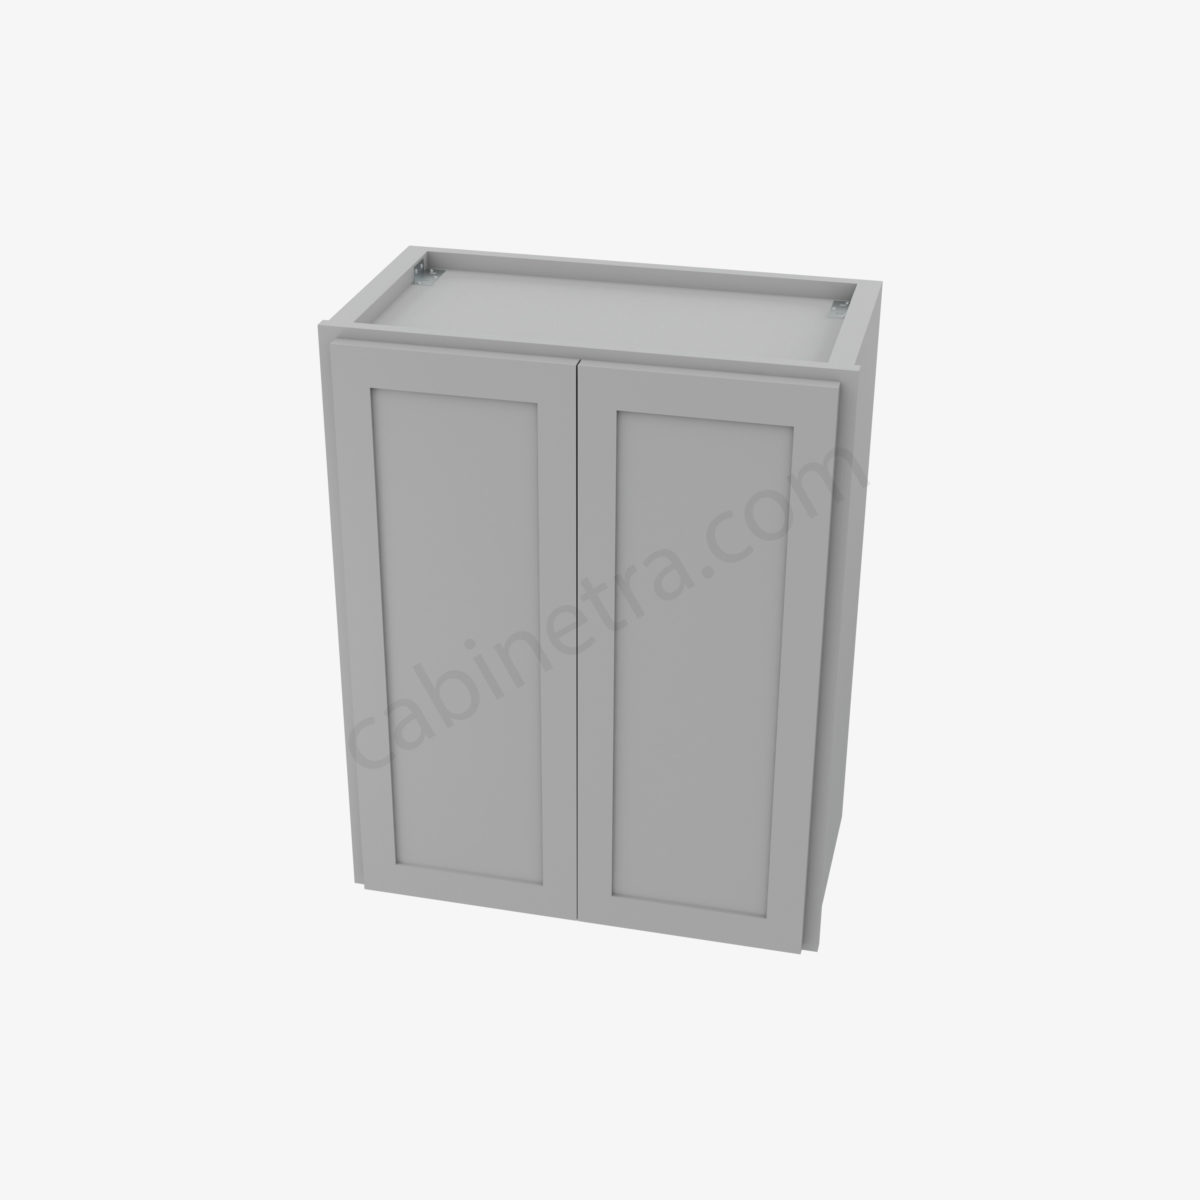 AB W2430B 3 Forevermark Lait Gray Shaker Cabinetra scaled